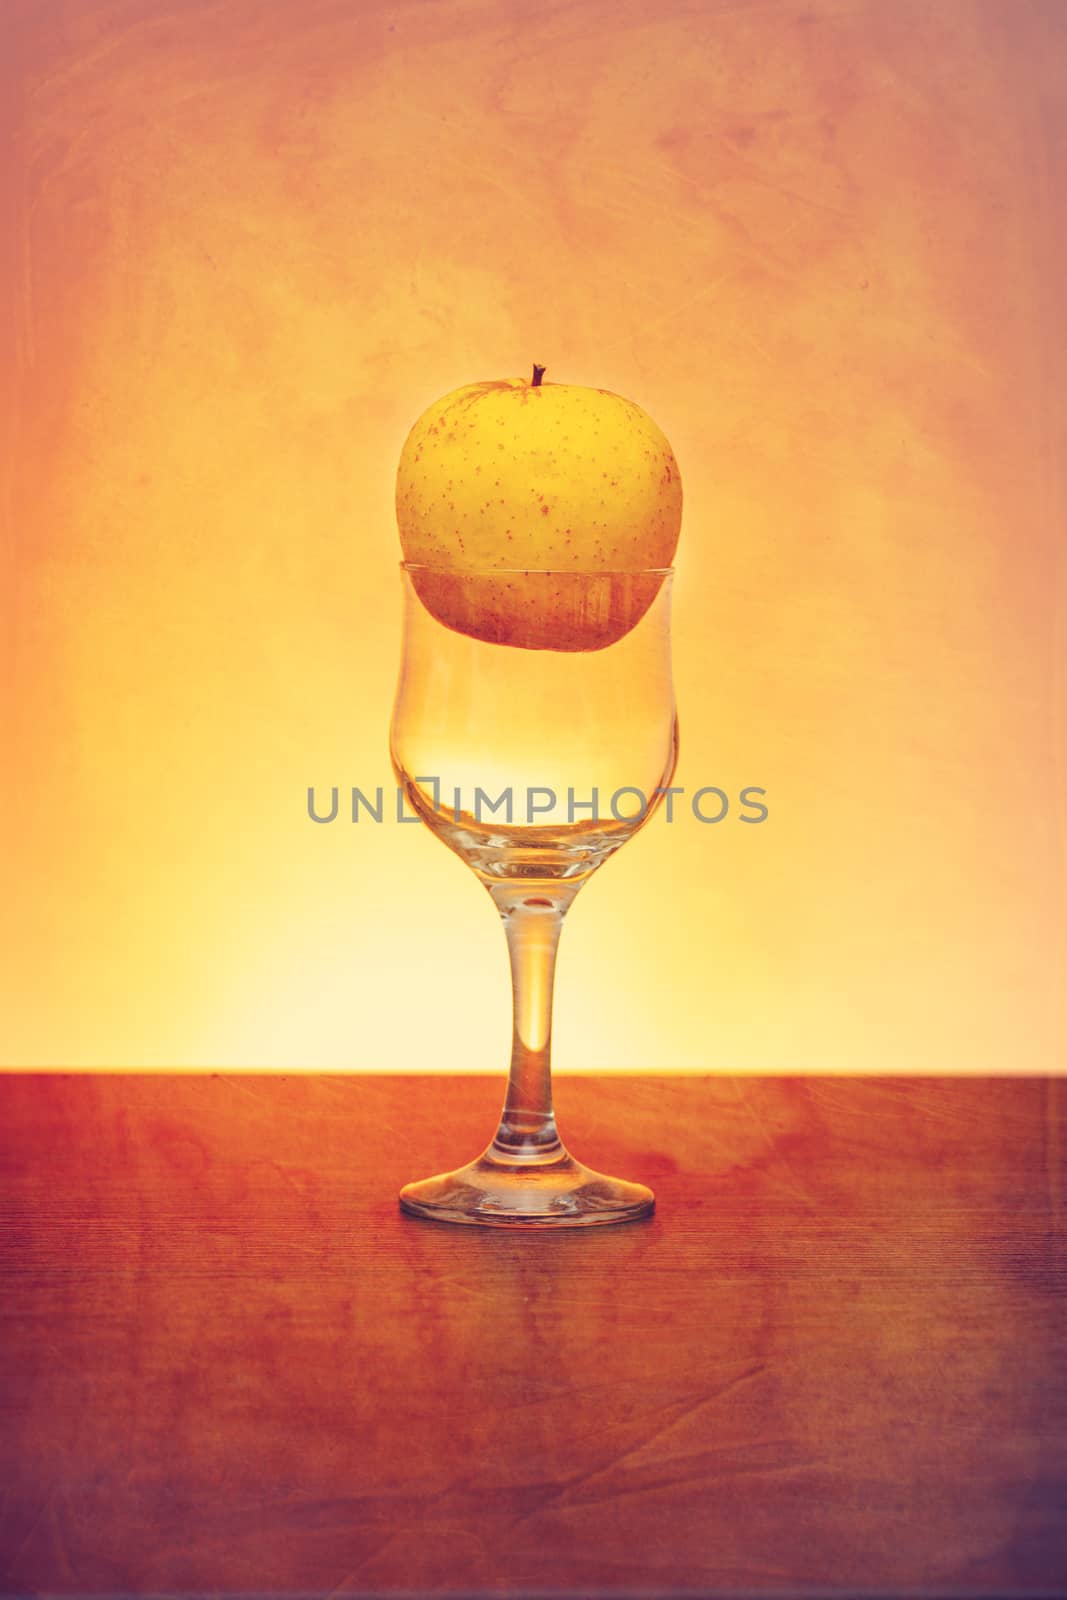 Apple in cider glass concept by marugod83